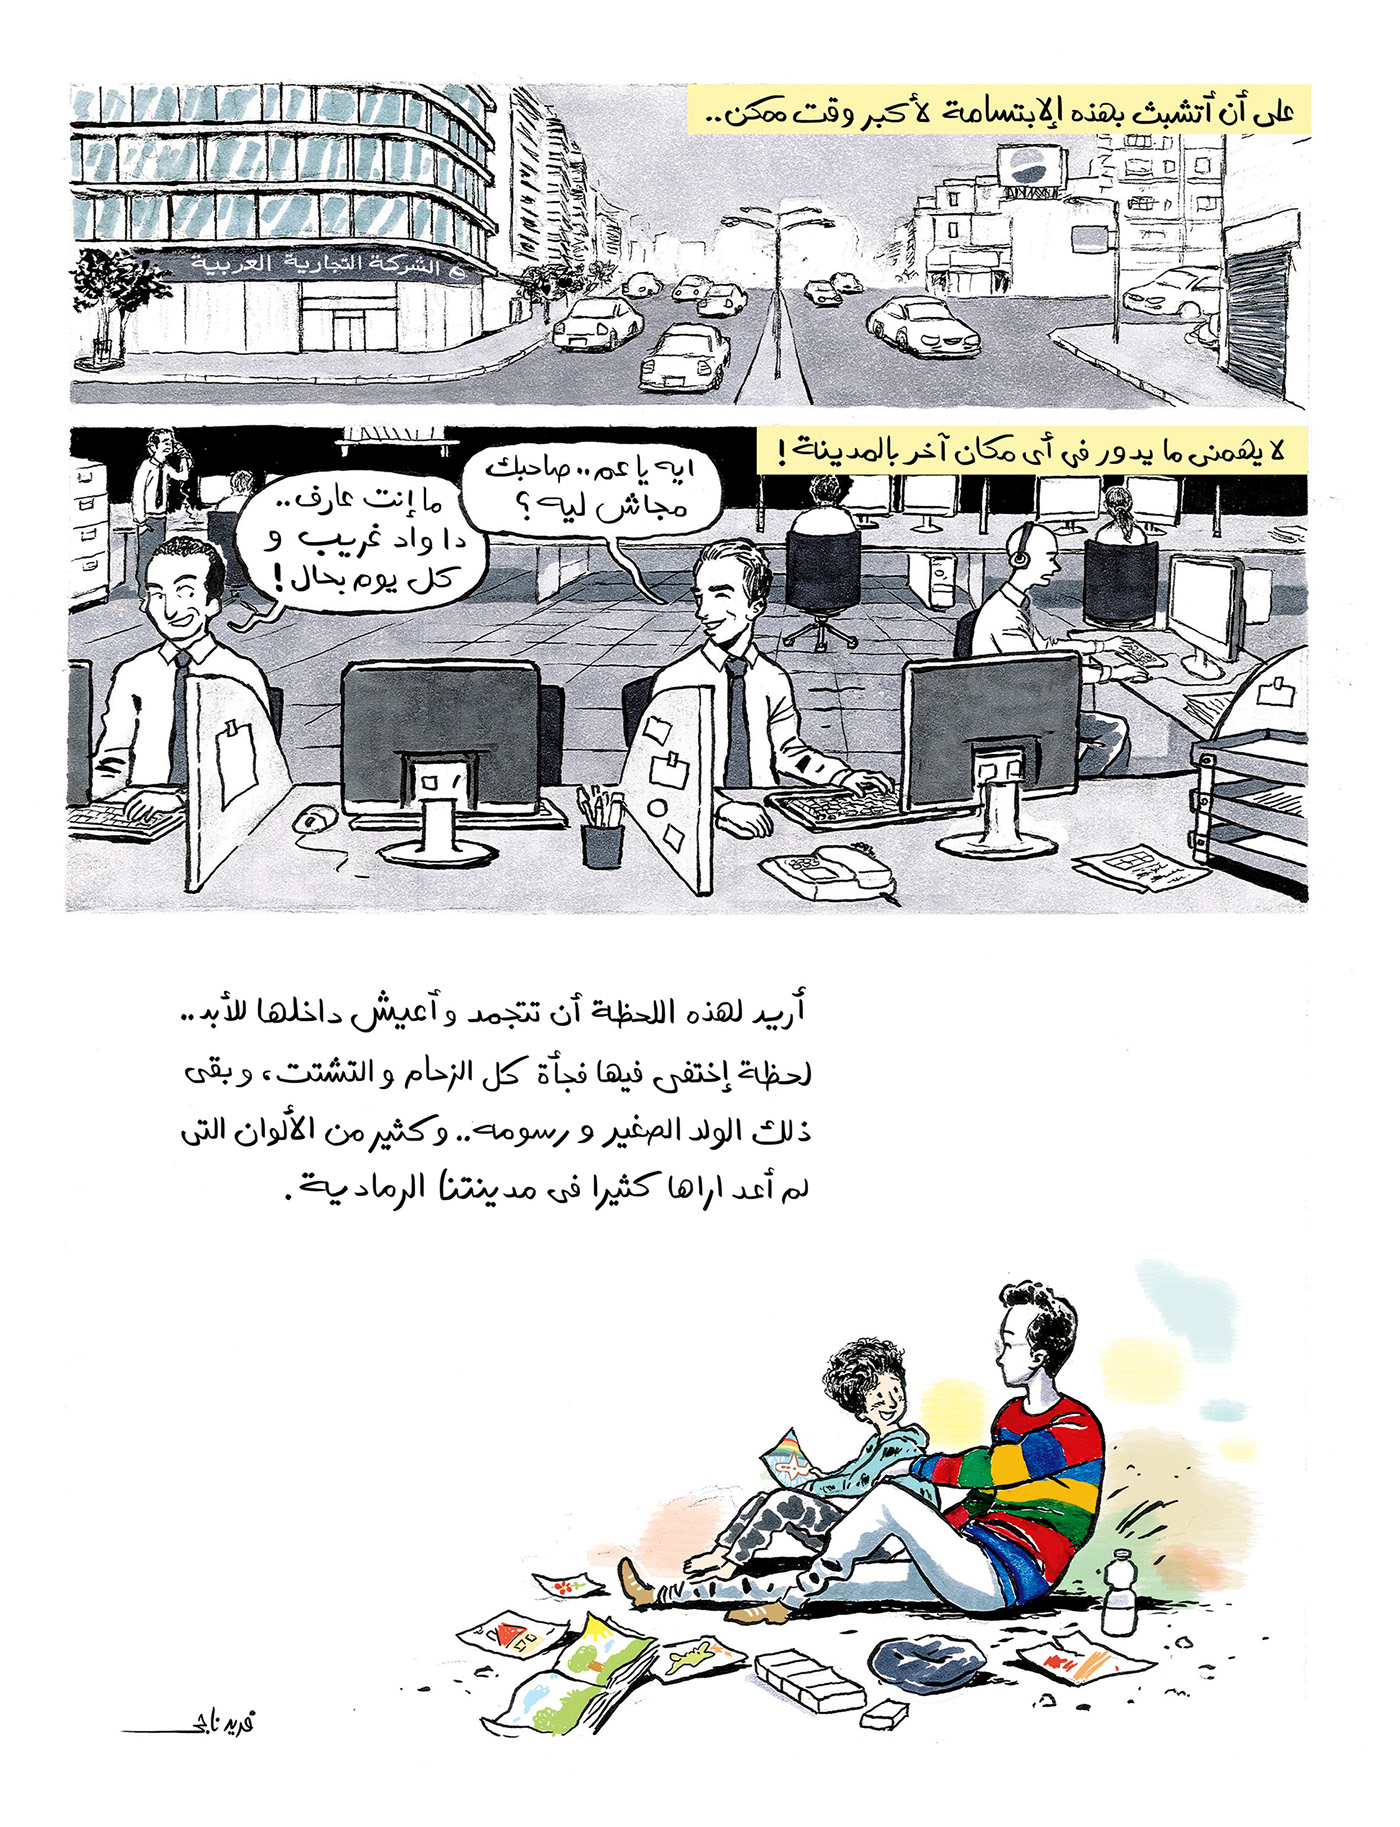 comics cairo gray graycity city colors illustrations buildings crowded storytelling  